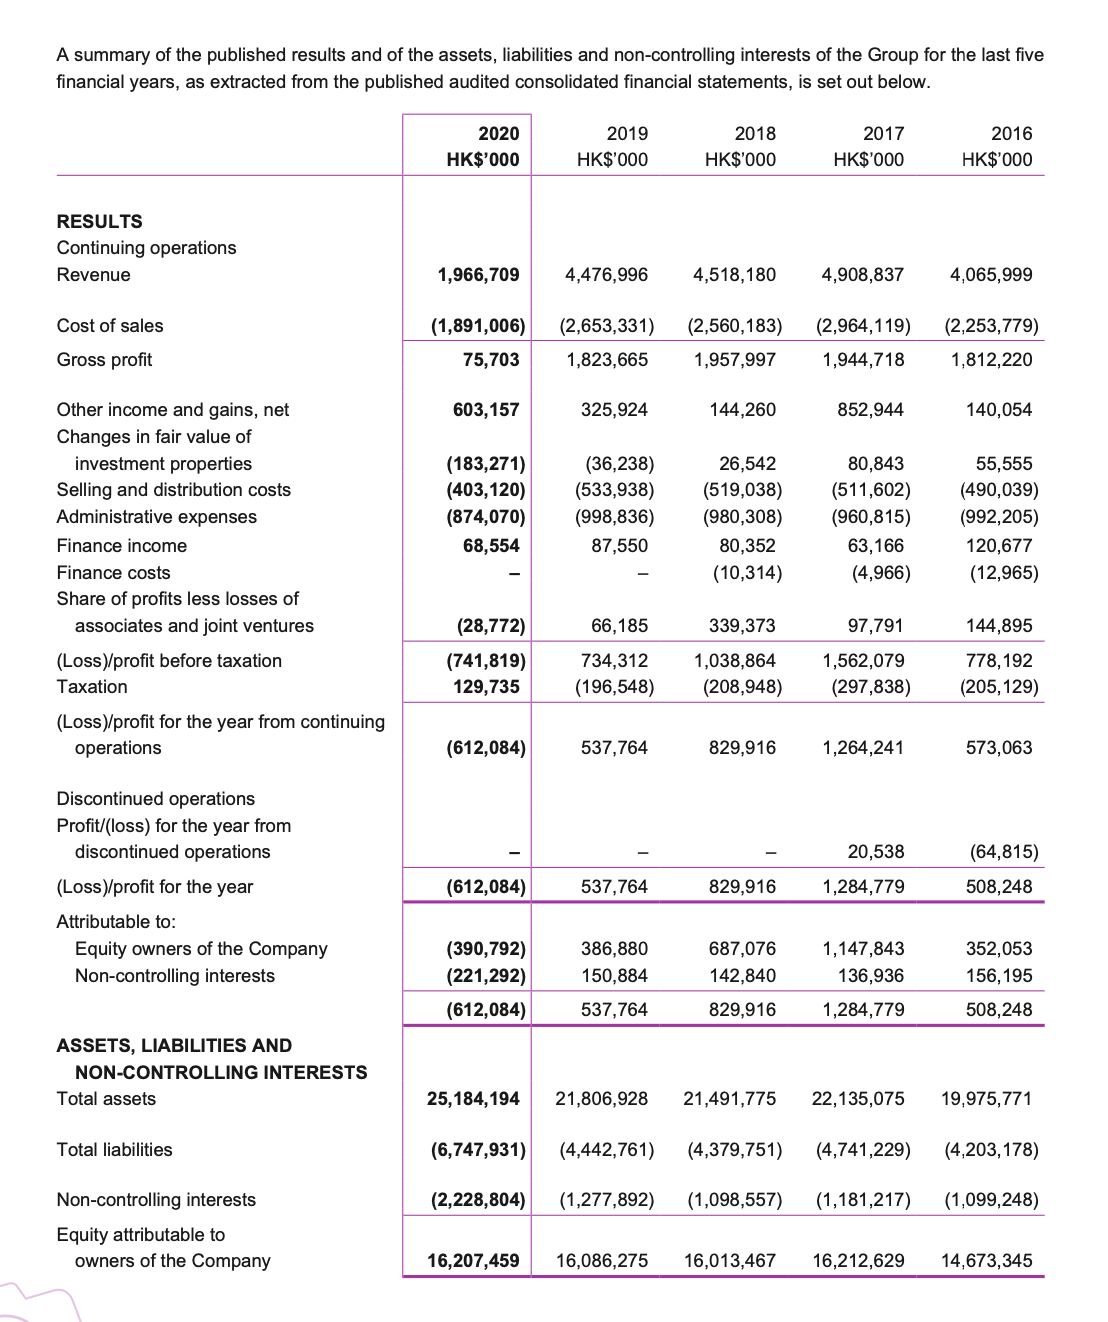 A summary of the published results and of the assets, liabilities and non-controlling interests of the Group for the last five
financial years, as extracted from the published audited consolidated financial statements, is set out below.
2020
2019
2018
2017
2016
HK$'000
HK$'000
HK$'000
HK$'000
HK$'000
RESULTS
Continuing operations
Revenue
1,966,709
4,476,996
4,518,180
4,908,837
4,065,999
Cost of sales
(1,891,006)
(2,653,331)
(2,560,183)
(2,964,119)
(2,253,779)
Gross profit
75,703
1,823,665
1,957,997
1,944,718
1,812,220
Other income and gains, net
603,157
325,924
144,260
852,944
140,054
Changes in fair value of
investment properties
(183,271)
(403,120)
(874,070)
(36,238)
(533,938)
(998,836)
26,542
80,843
55,555
Selling and distribution costs
Administrative expenses
(519,038)
(511,602)
(960,815)
(490,039)
(992,205)
(980,308)
Finance income
68,554
87,550
80,352
63,166
120,677
Finance costs
(10,314)
(4,966)
(12,965)
Share of profits less losses of
associates and joint ventures
(28,772)
66,185
339,373
97,791
144,895
(Loss)/profit before taxation
(741,819)
129,735
734,312
1,038,864
1,562,079
778,192
Таxation
(196,548)
(208,948)
(297,838)
(205,129)
(Loss)/profit for the year from continuing
operations
(612,084)
537,764
829,916
1,264,241
573,063
Discontinued operations
Profit/(loss) for the year from
discontinued operations
20,538
(64,815)
(Loss)/profit for the year
(612,084)
537,764
829,916
1,284,779
508,248
Attributable to:
Equity owners of the Company
687,076
(390,792)
(221,292)
386,880
1,147,843
352,053
Non-controlling interests
150,884
142,840
136,936
156,195
(612,084)
537,764
829,916
1,284,779
508,248
ASSETS, LIABILITIES AND
NON-CONTROLLING INTERESTS
Total assets
25,184,194
21,806,928
21,491,775
22,135,075
19,975,771
Total liabilities
(6,747,931)
(4,442,761)
(4,379,751)
(4,741,229)
(4,203,178)
Non-controlling interests
(2,228,804)
(1,277,892)
(1,098,557)
(1,181,217)
(1,099,248)
Equity attributable to
owners of the Company
16,207,459
16,086,275
16,013,467
16,212,629
14,673,345
